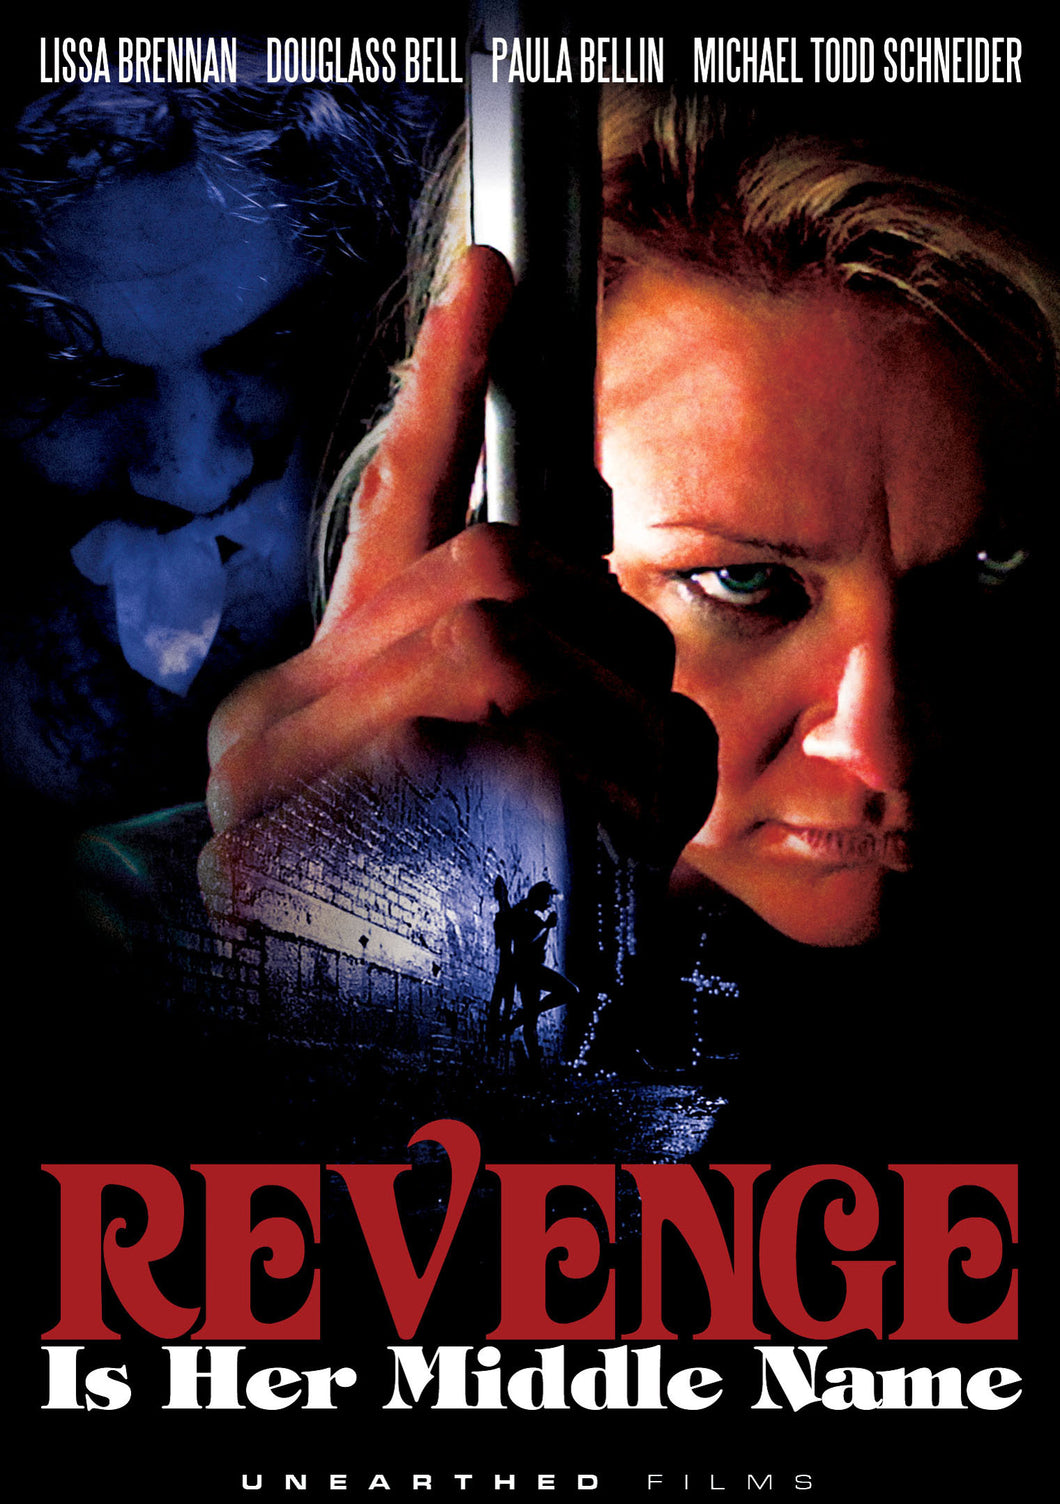 Revenge Is Her Middle Name (DVD)